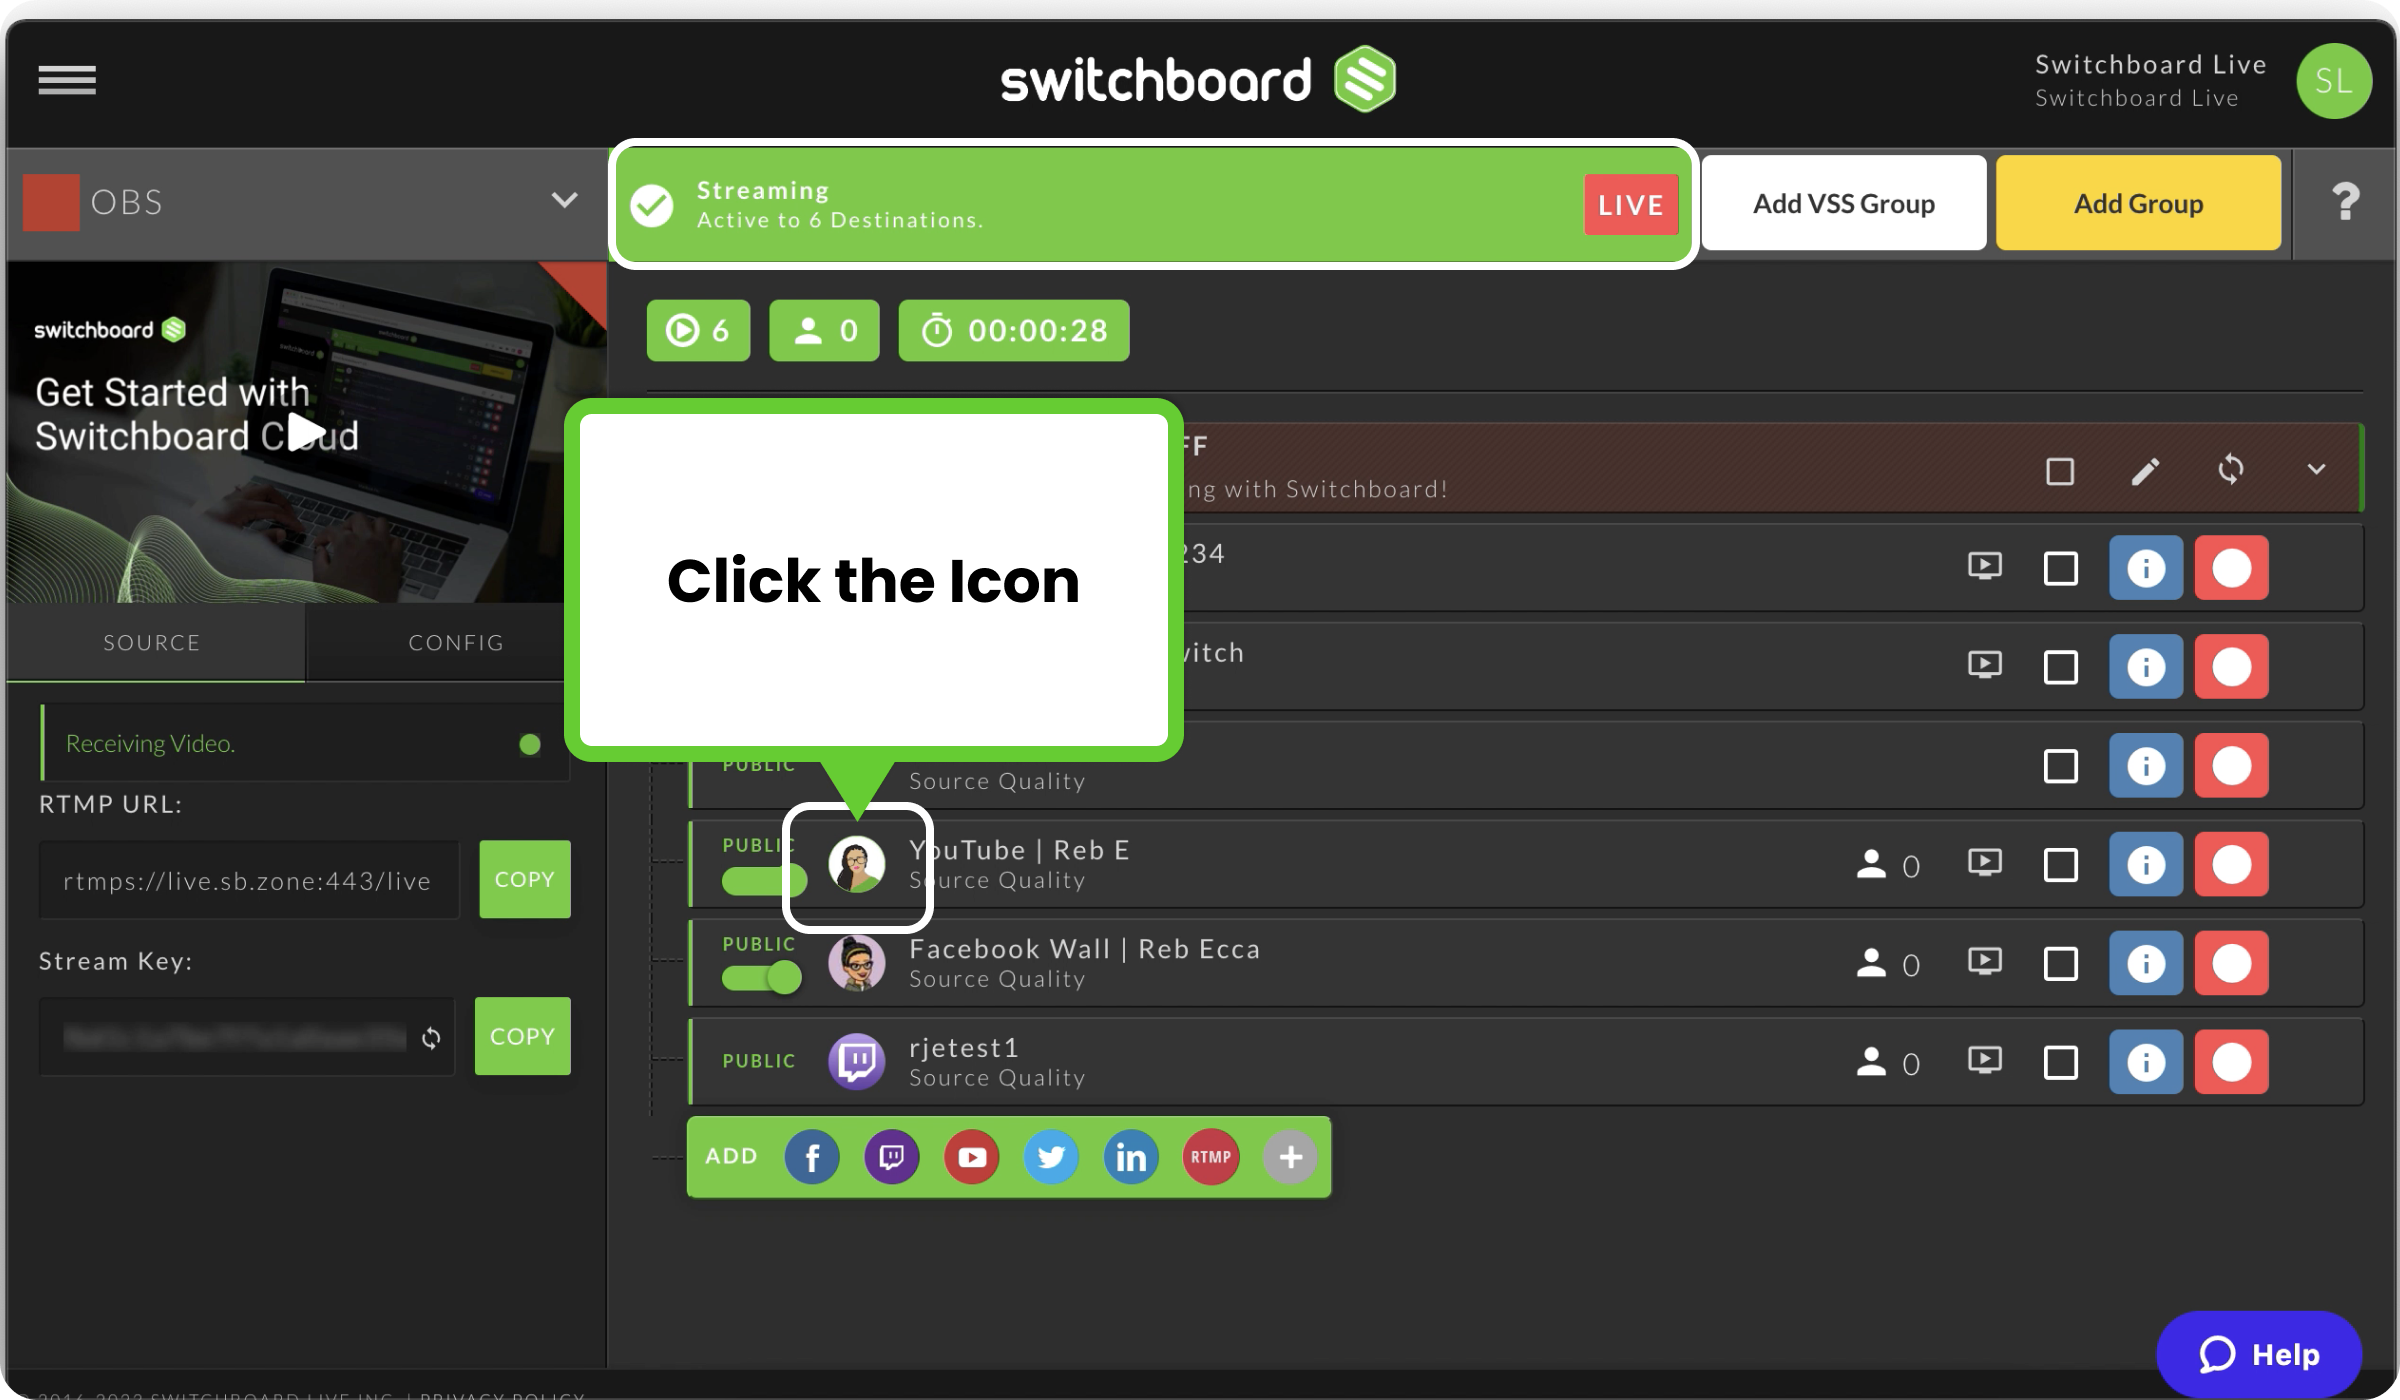 switchboard_live-click_social_icon_to_view_and_watch_the_stream.png